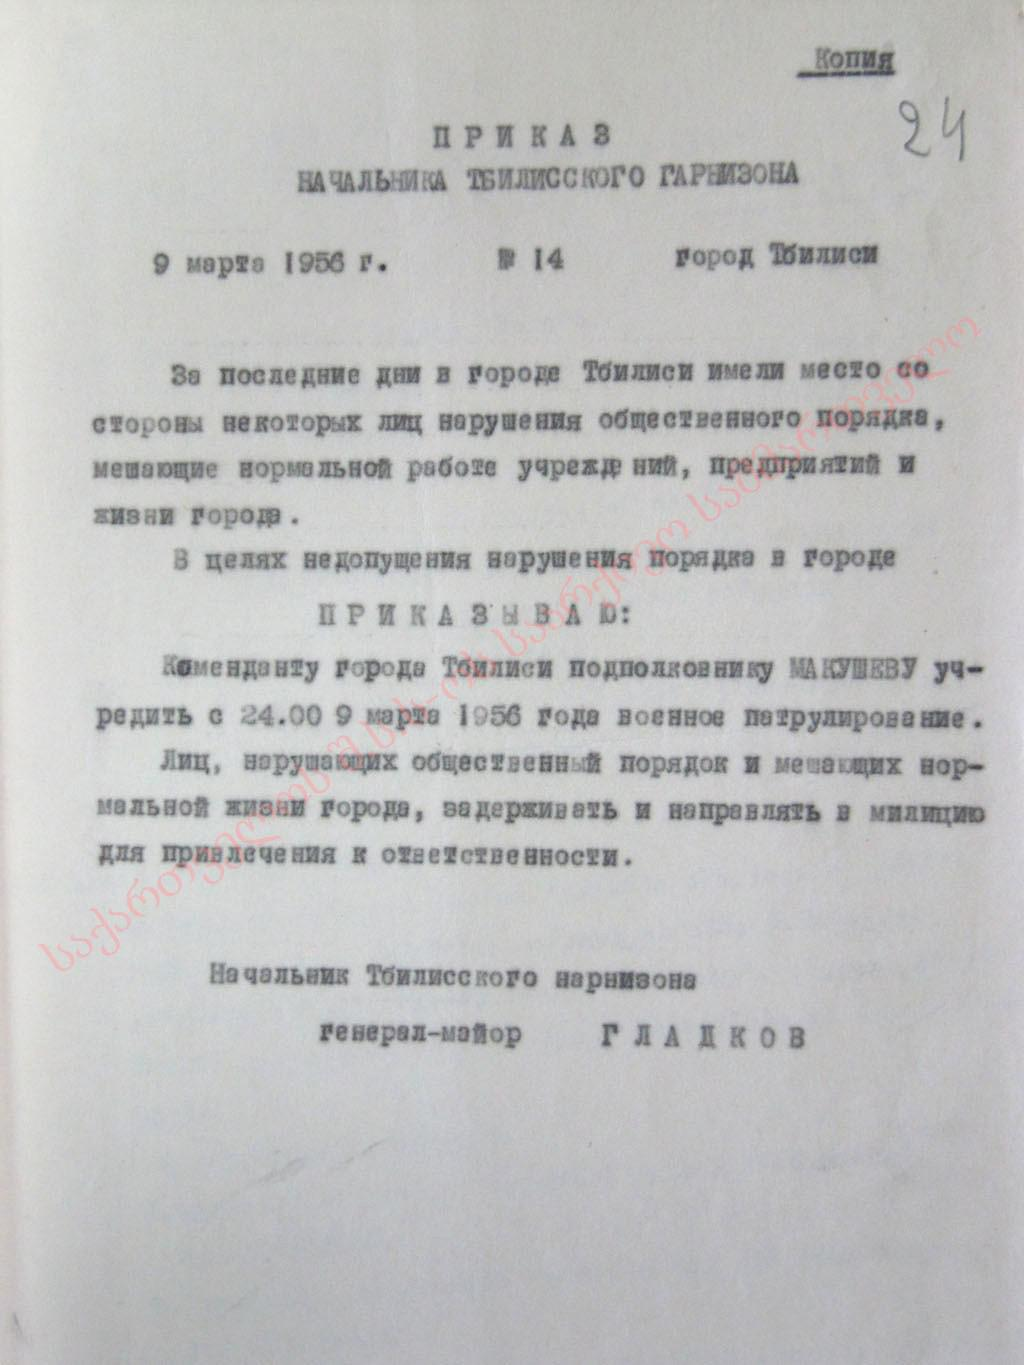 The command №14 of General-Major Gladkov, the head of the military garrison of  Tbilisi, on establishment of patrolling and maintaining public order from 24:00 of March 9th, 1956.